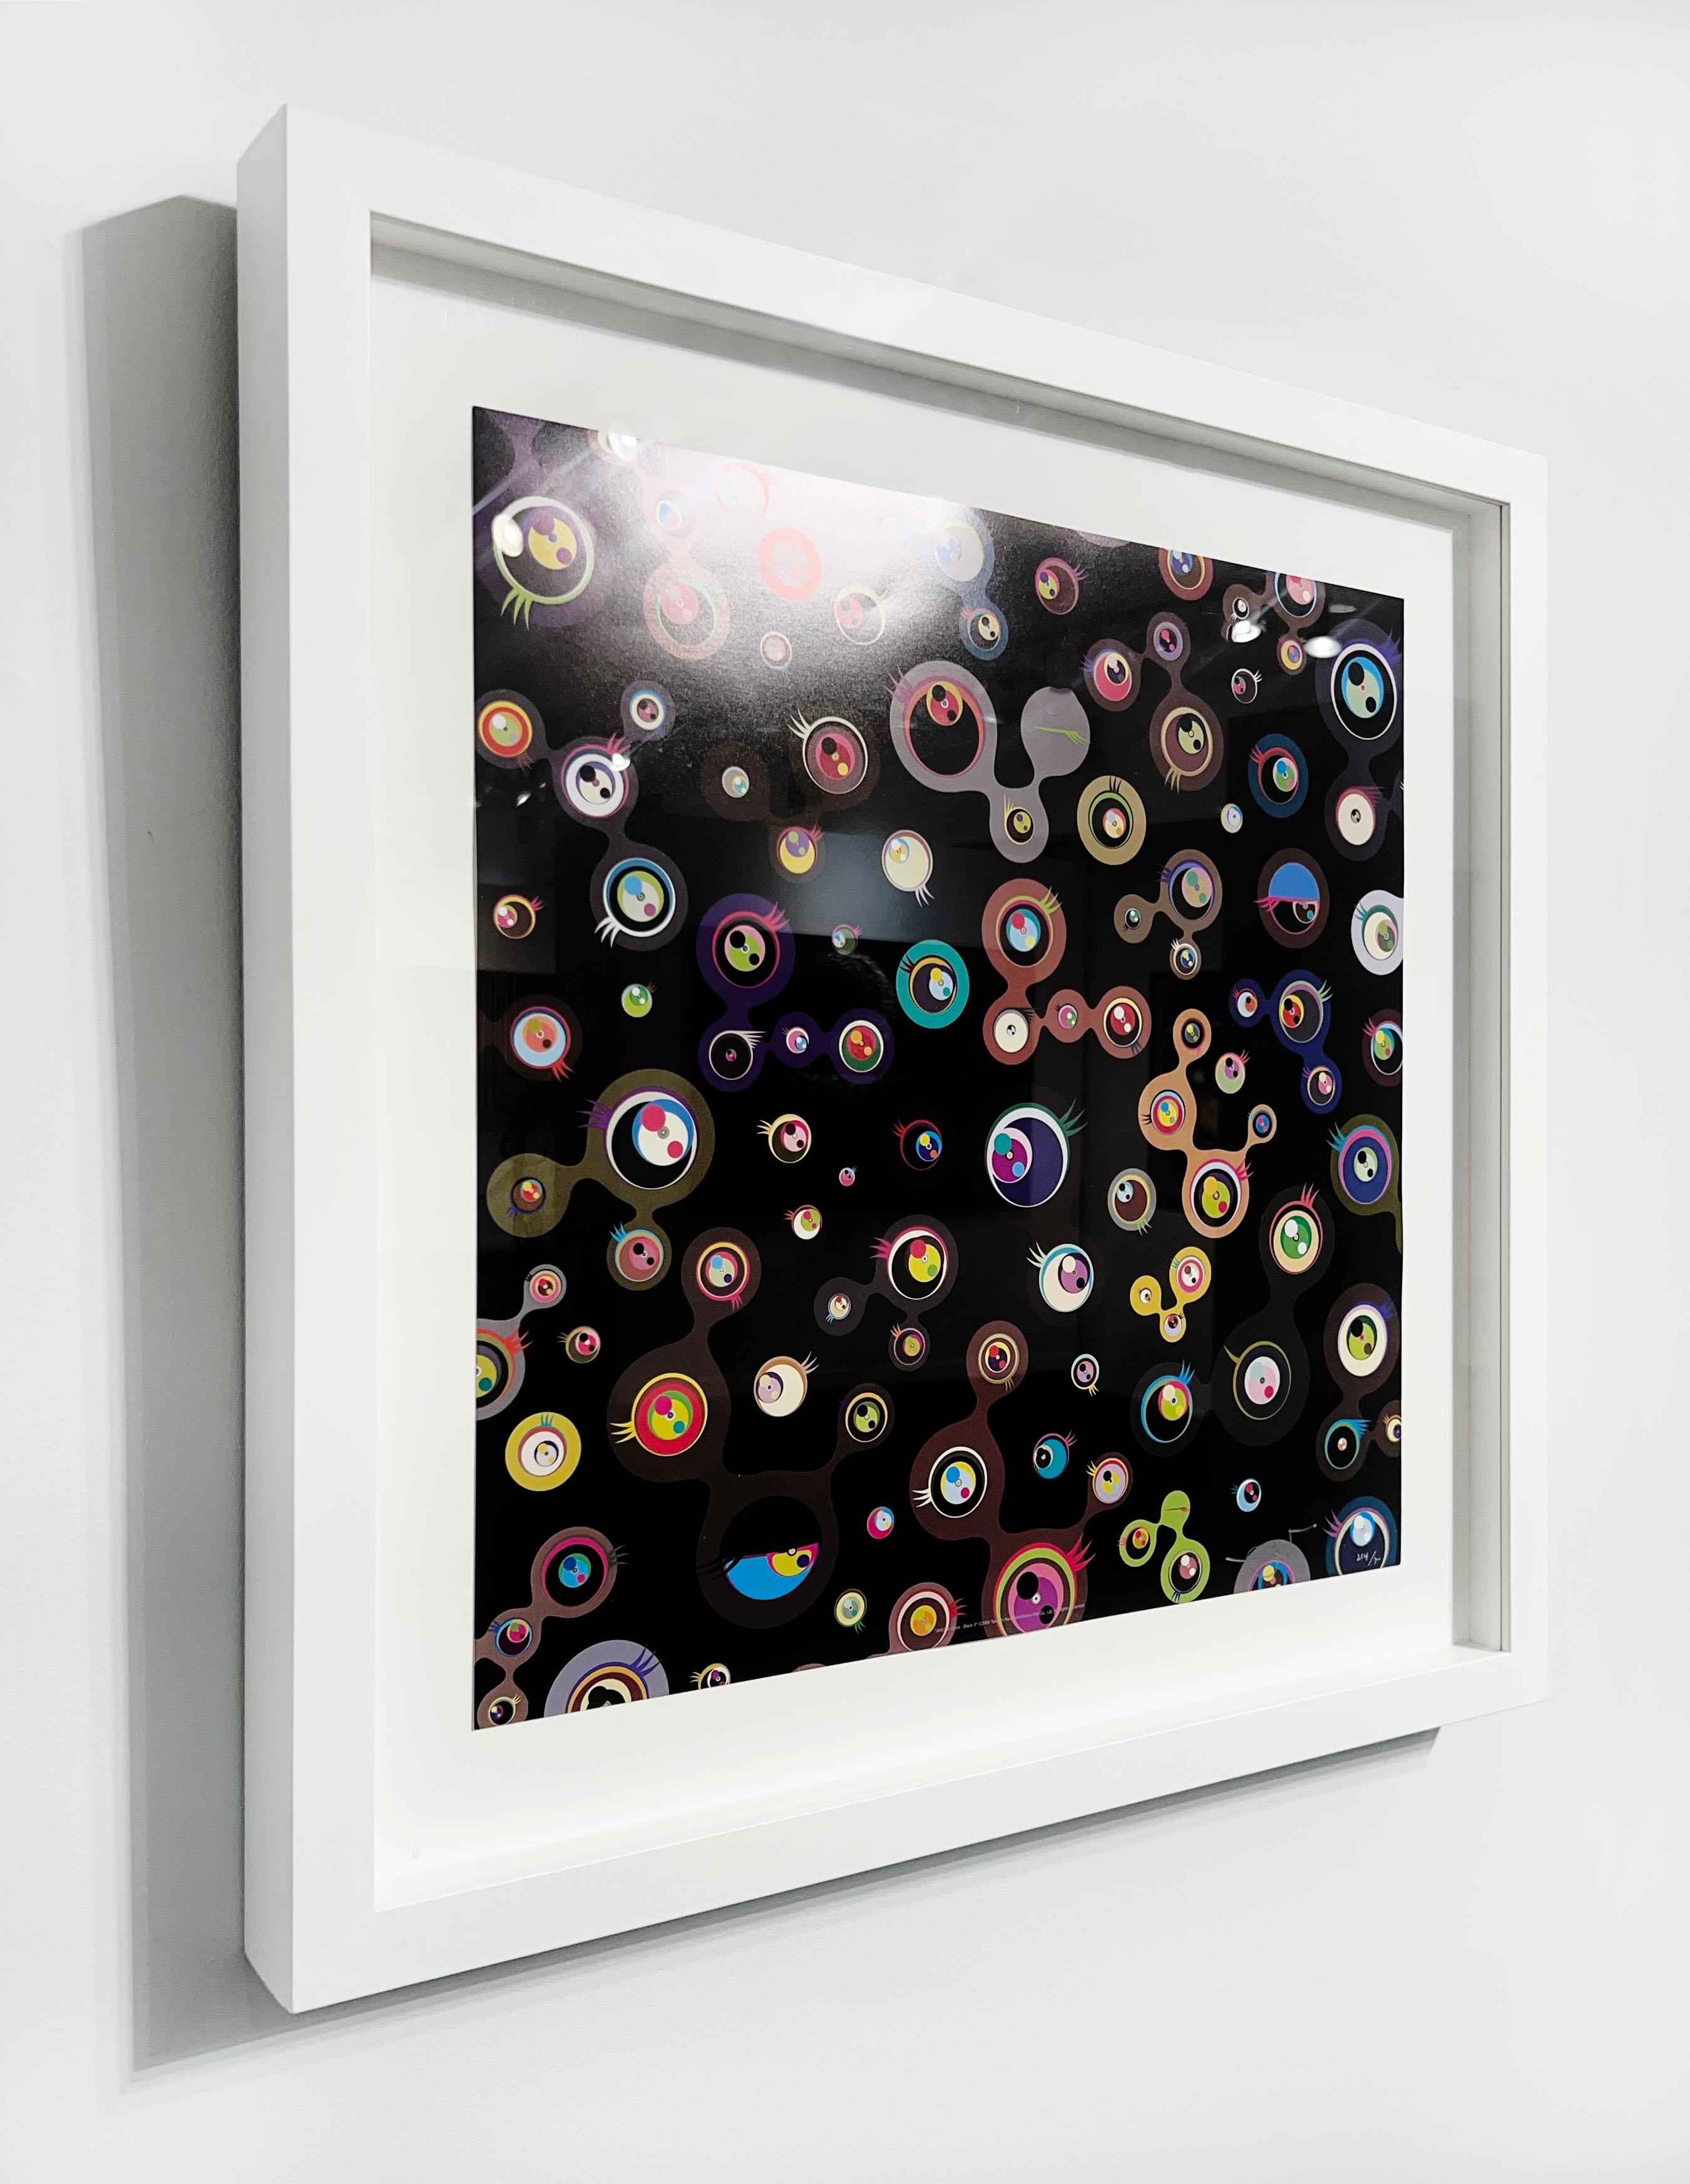 Artist:  Murakami, Takashi
Title:  Jellyfish eyes - Black 5
Date:  2004
Medium:  Offset lithograph in colors on smooth wove paper
Unframed Dimensions:  19.5